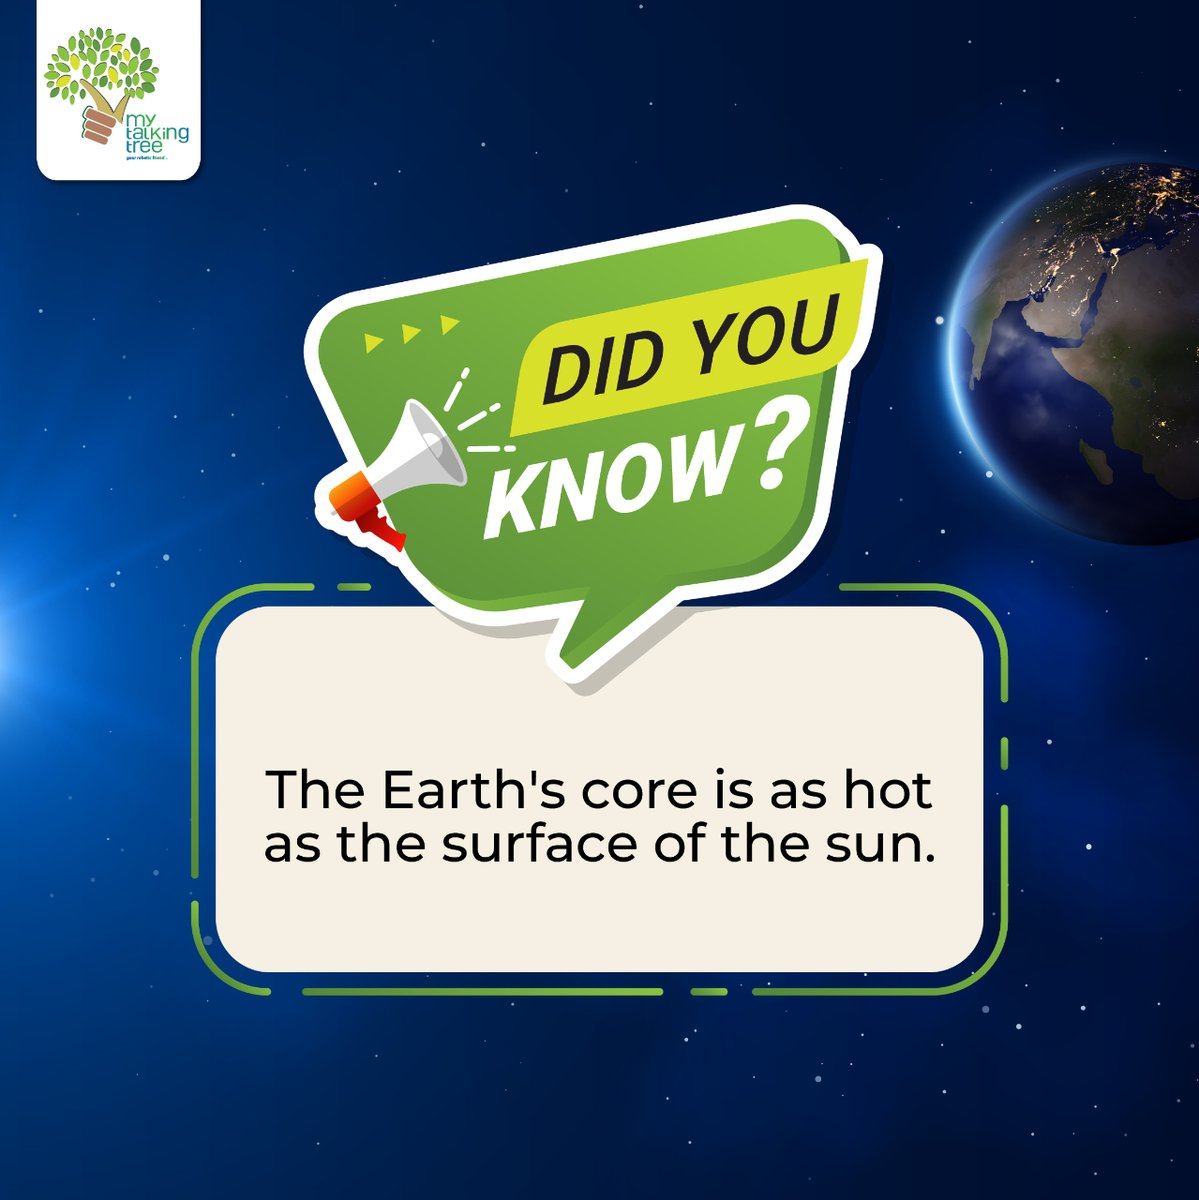 Here's an interesting fact:🌍🔥Our planet has a molten core that blazes with temperatures as scorching as the sun's surface itself! 

#Mytalkingtree #mrdudu #FunFact #DidYouKnow #FunFactFriday #Trivia #InterestingFacts #FactOfTheDay